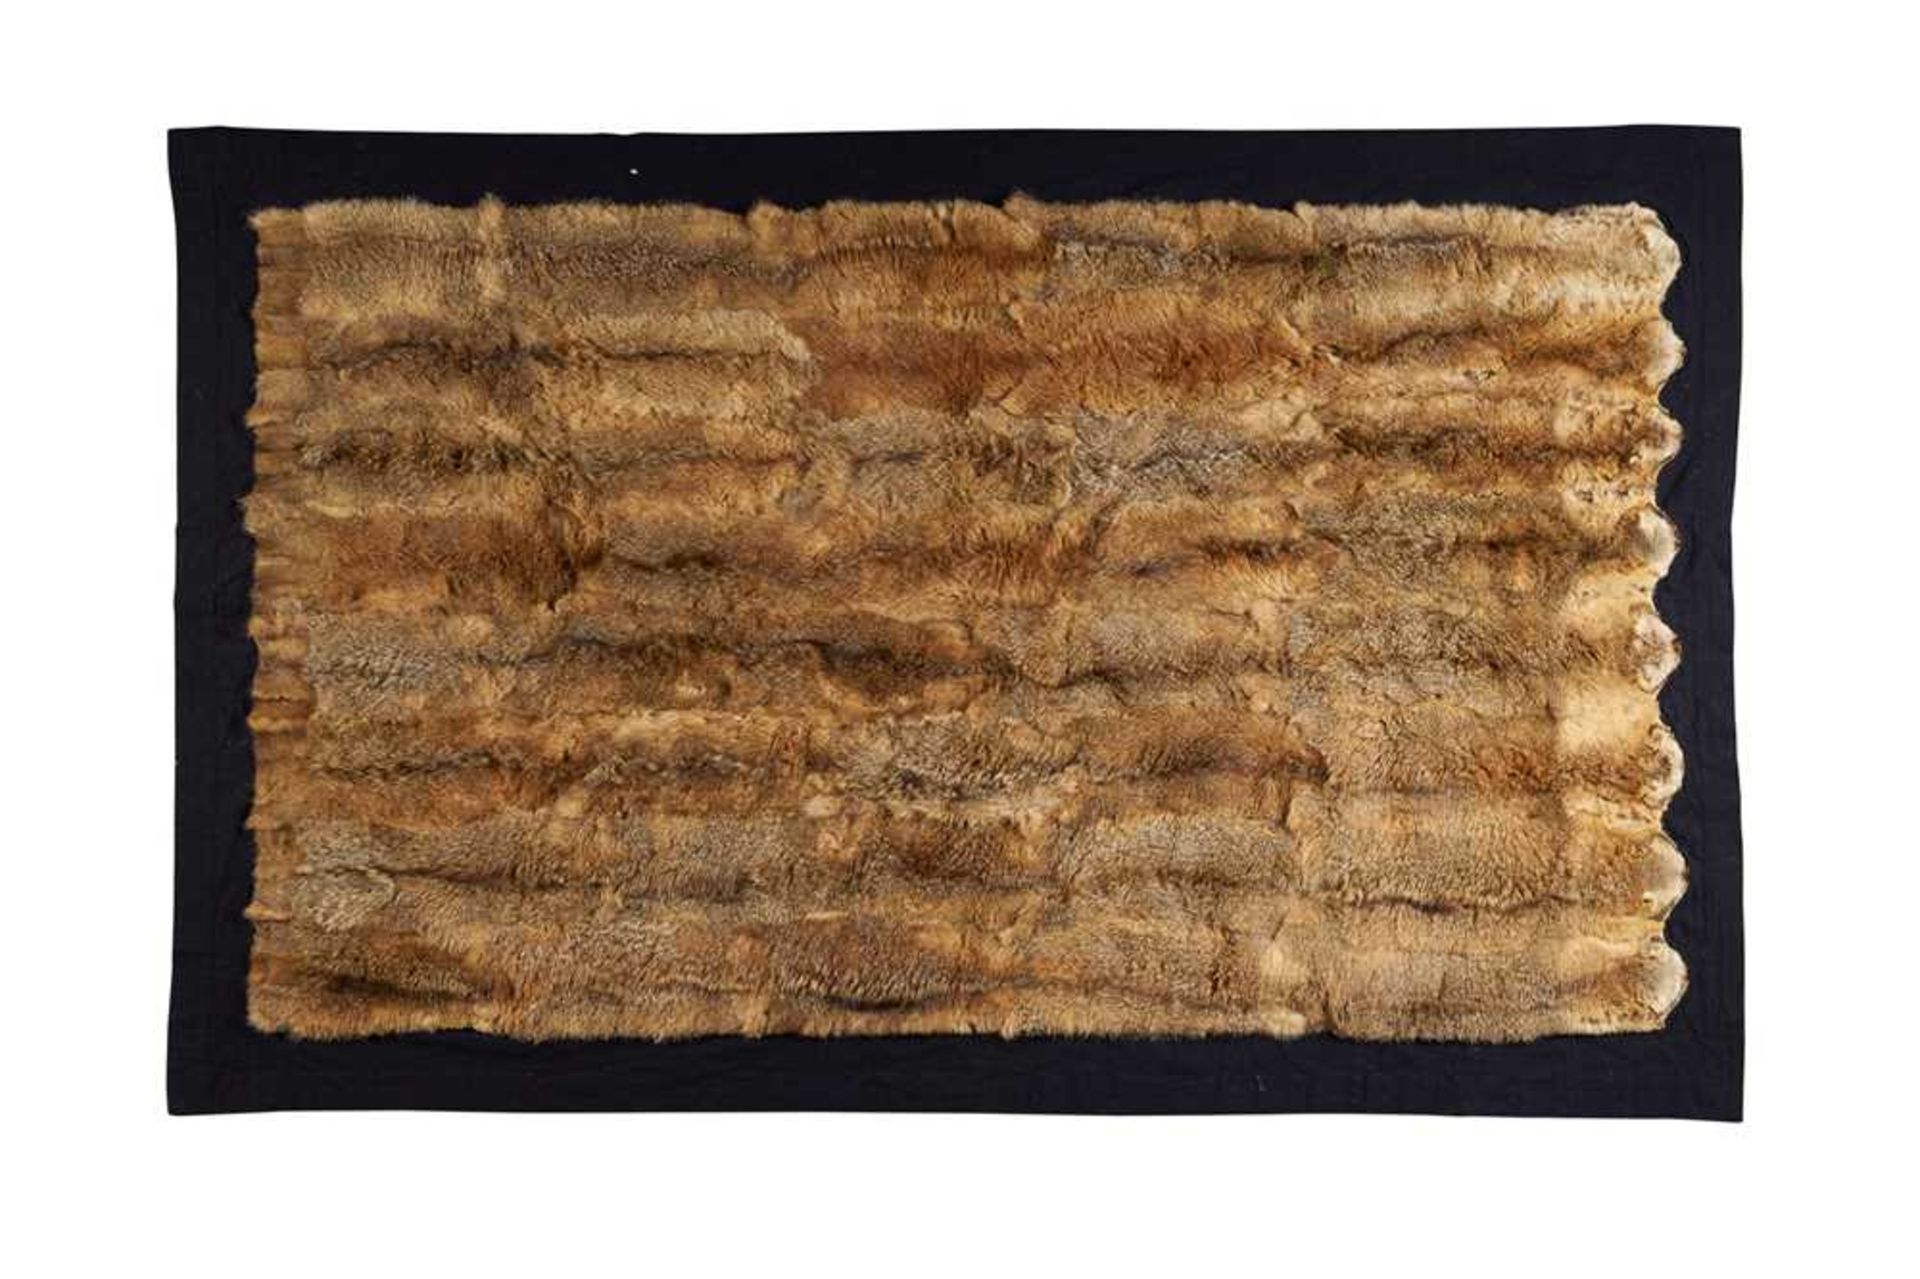 ROWLAND WARD WOLF FUR CARRIAGE BLANKET EARLY 20TH CENTURY